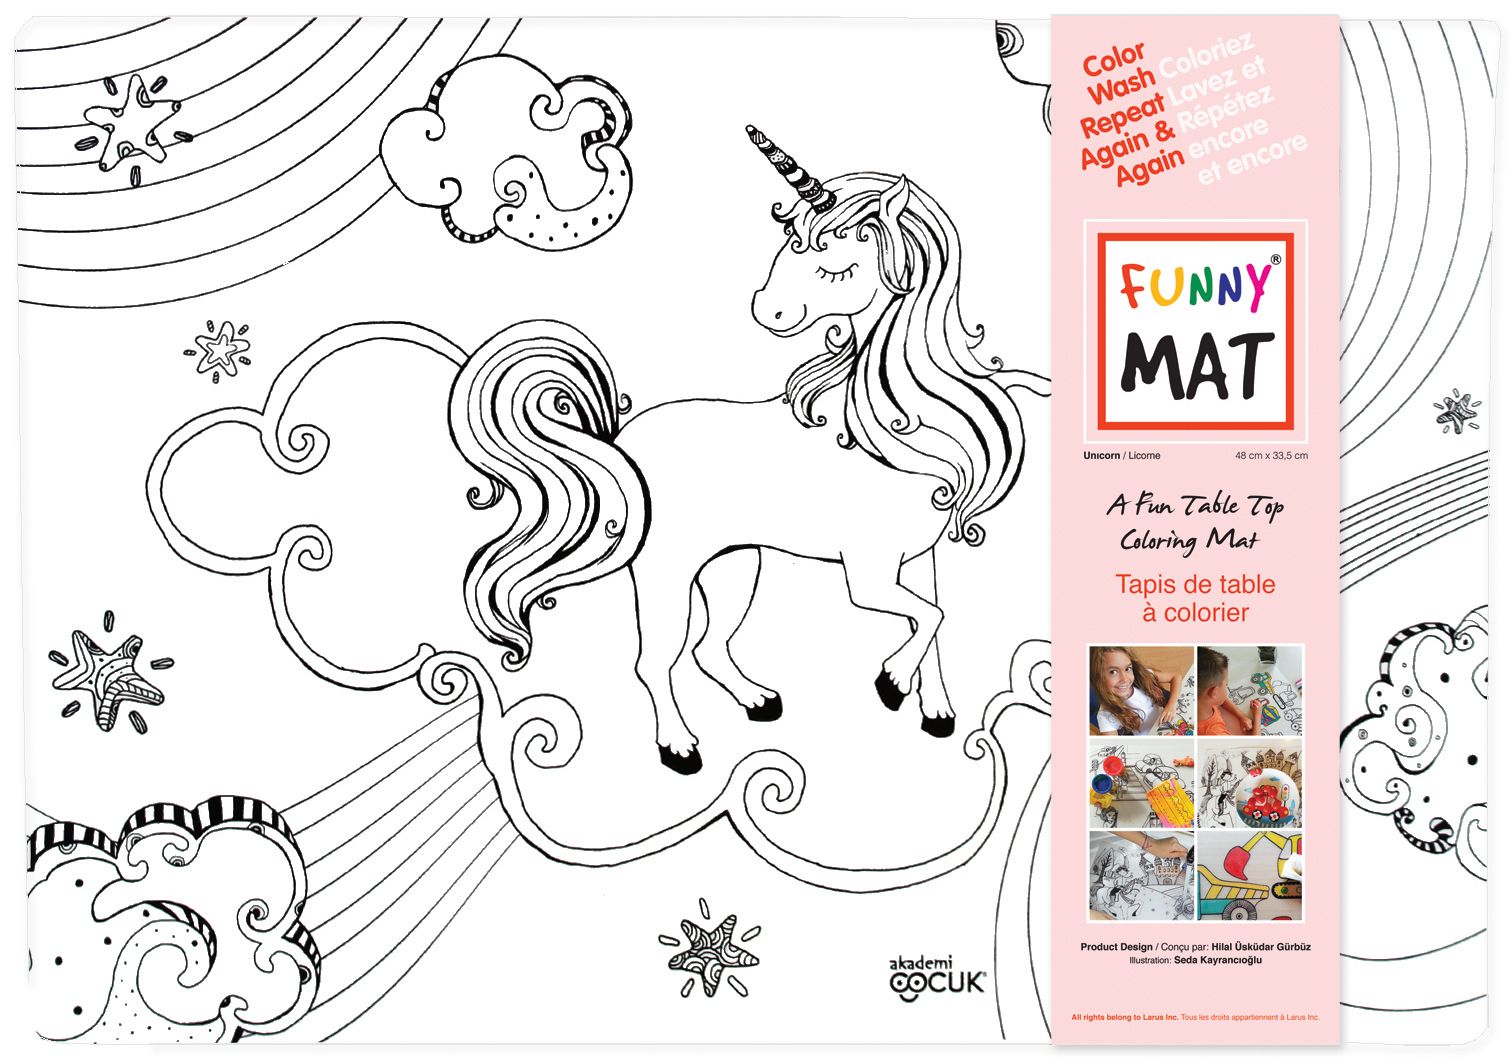 Funny MAT Table Top Coloring Mats - Unicorn, Mermaid With 6 Markers- Blesket Canada